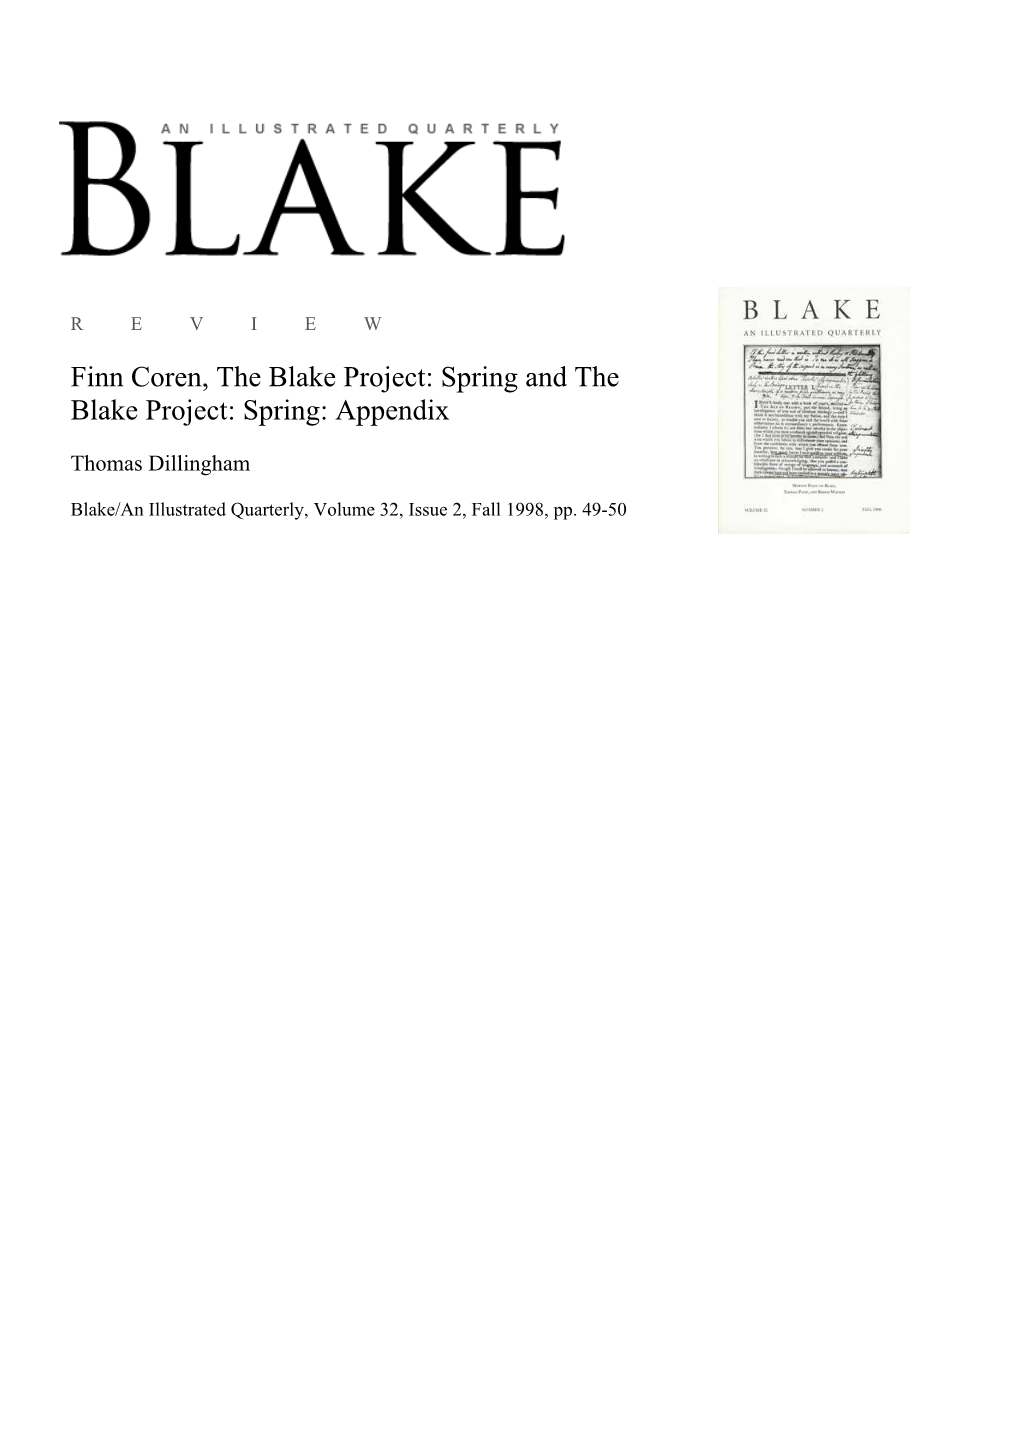 Finn Coren, the Blake Project: Spring and the Blake Project: Spring: Appendix